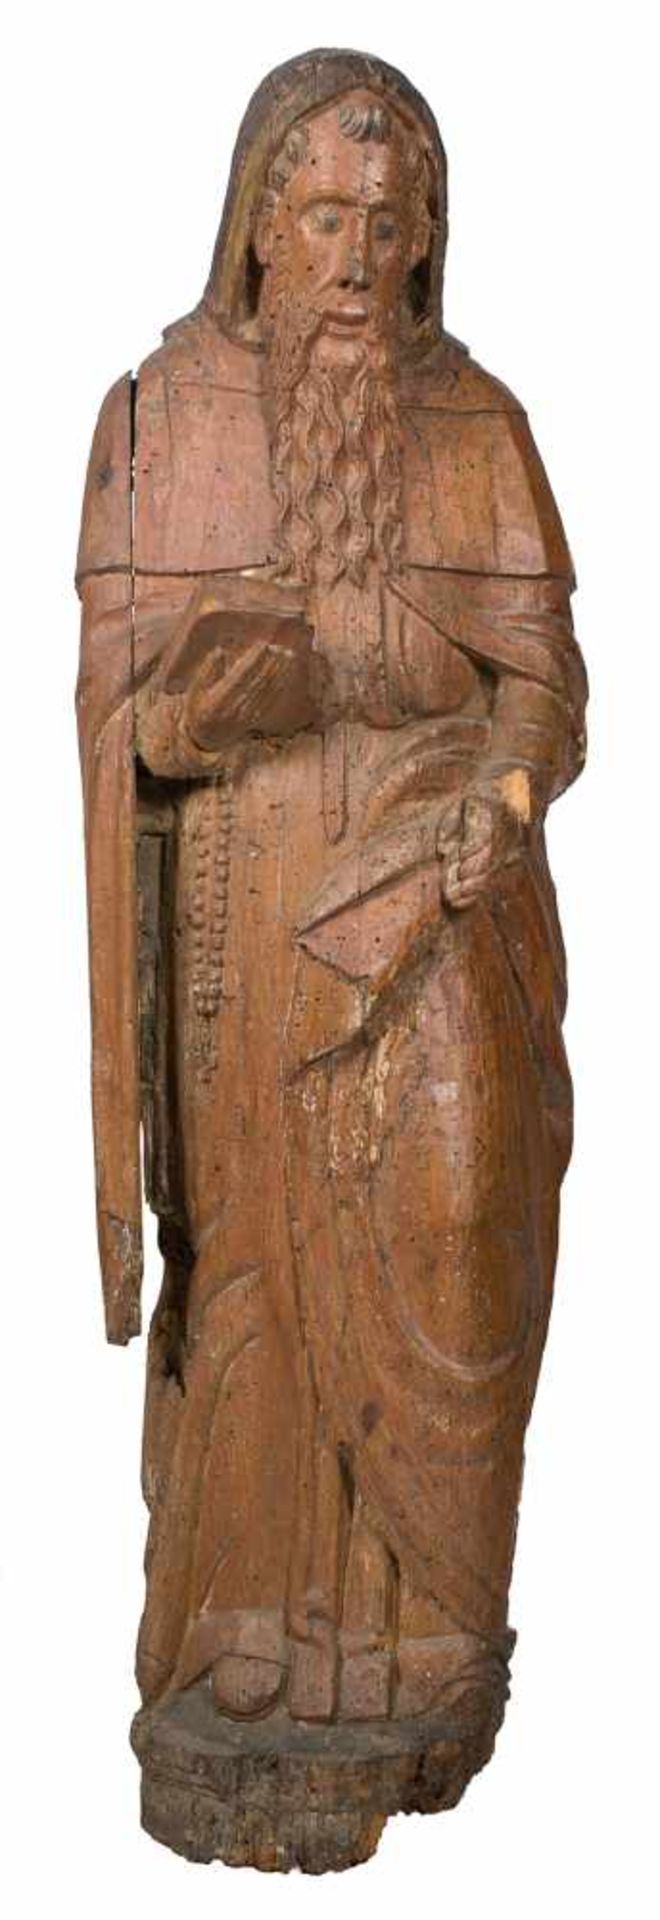 Saint Anthony Carved wooden sculpture. Early 16th century.Saint Anthony Carved wooden sculpture.